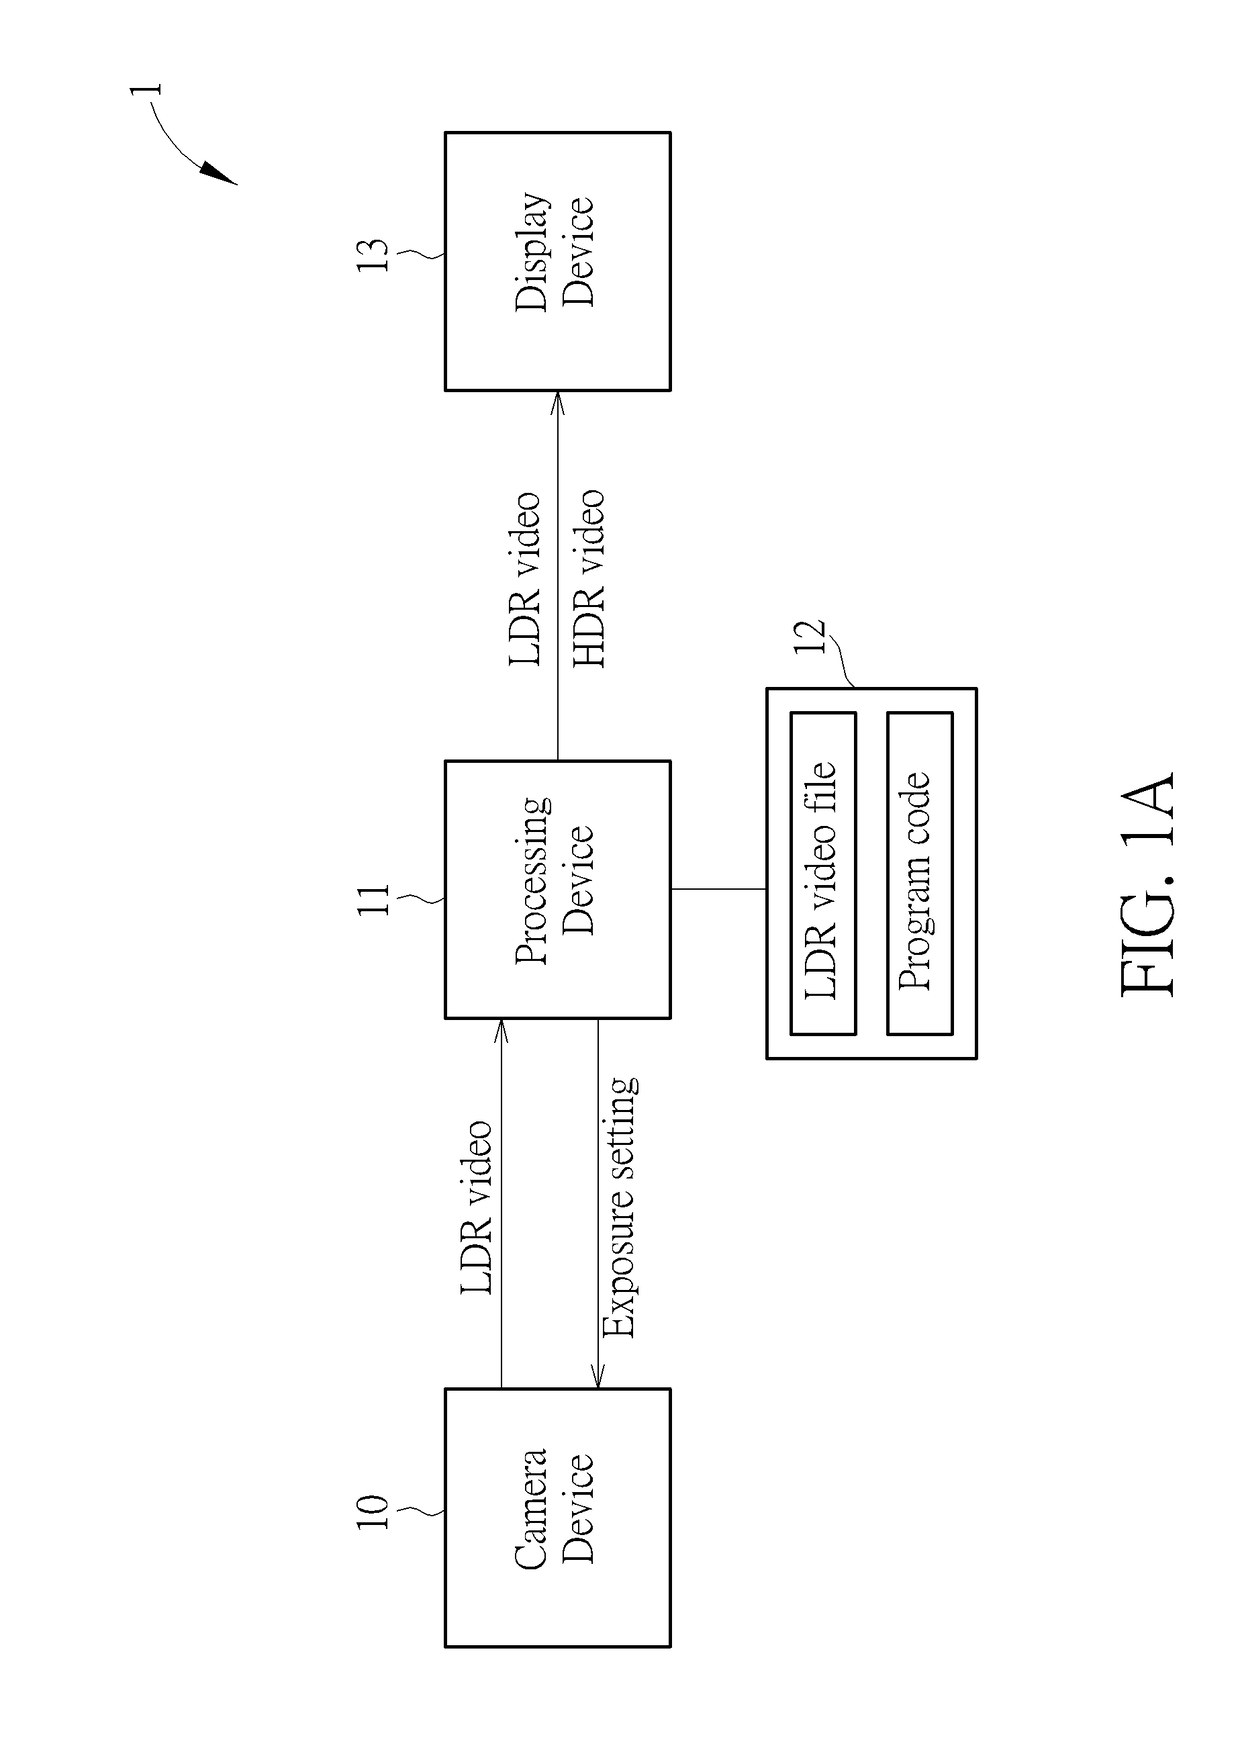 Apparatus and Method for Reconstructing High Dynamic Range Video